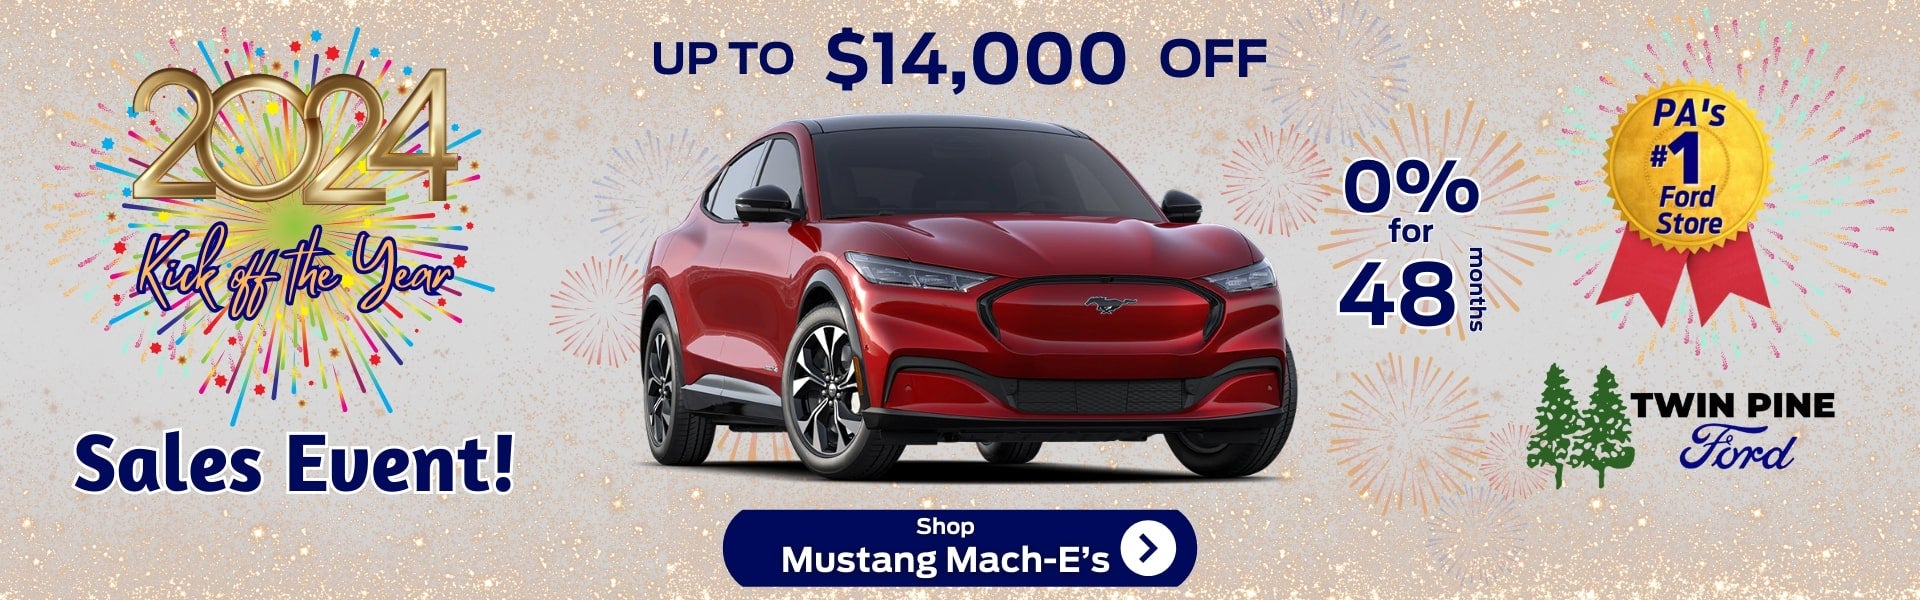 UP TO $14,000 OFF